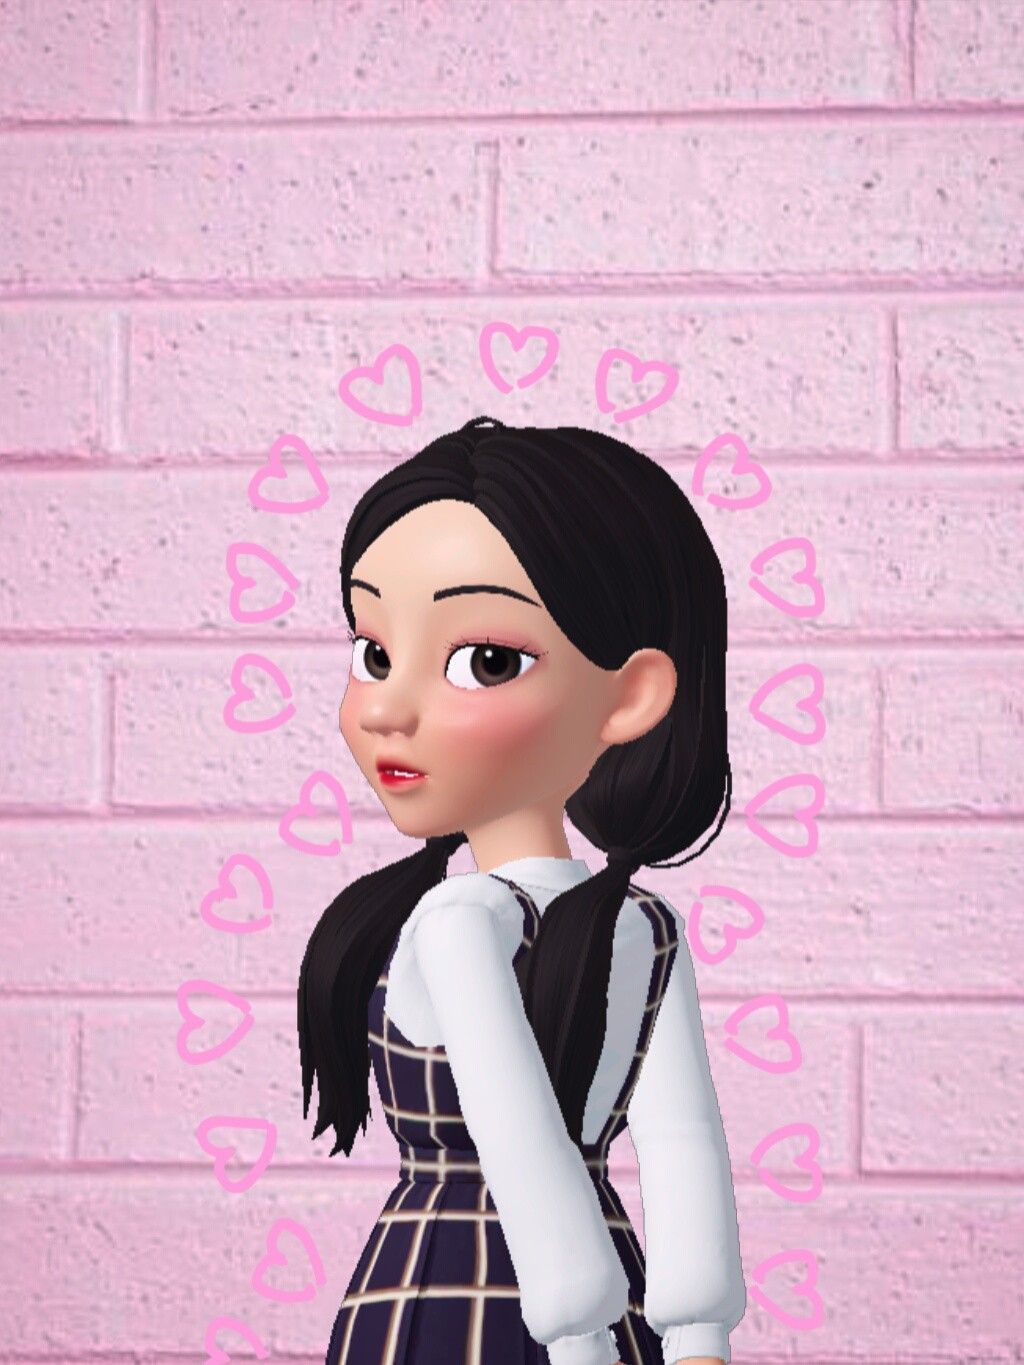 Anna On Zepeto Profile Pictures And Wallpaper Disney